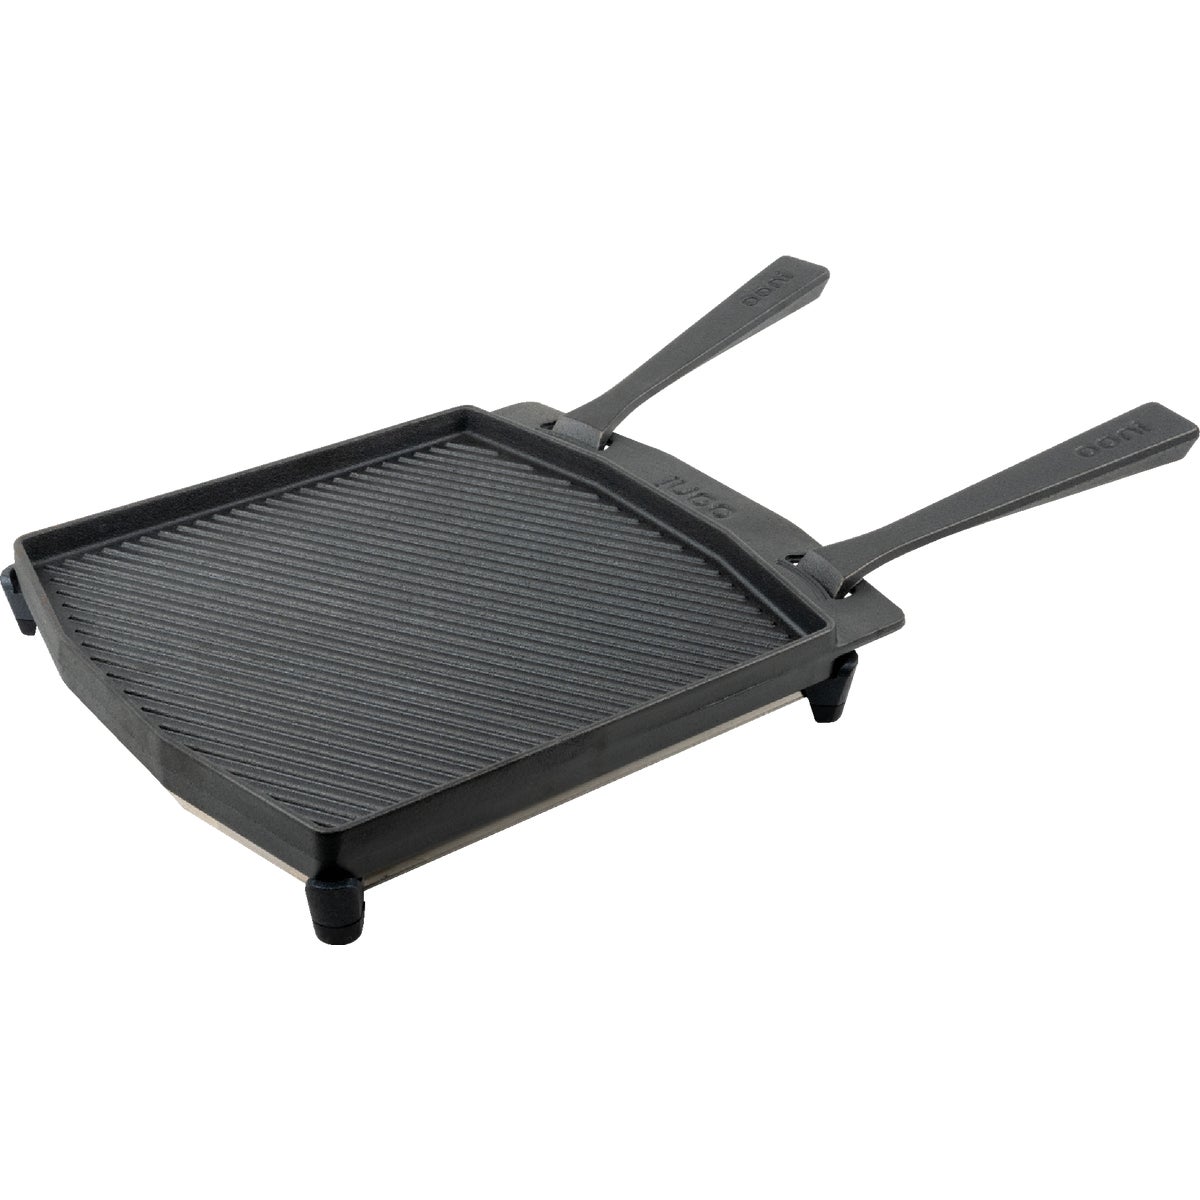 Outdoor Pizza Oven Skillet